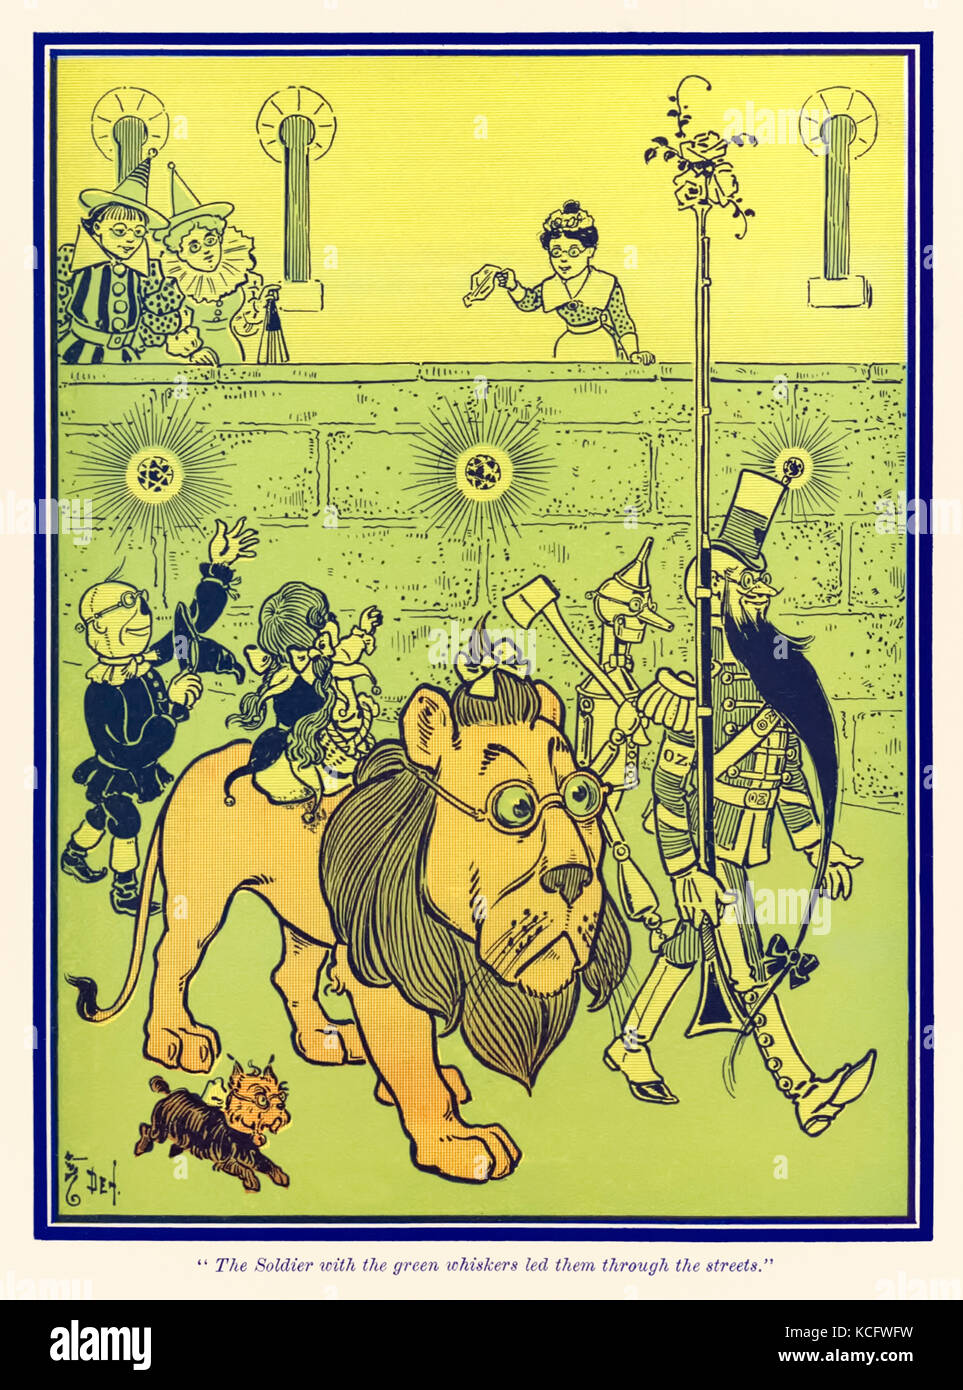 “The Soldier with the green whiskers led them through the streets.” from ‘The Wonderful Wizard of Oz’ by L. Frank Baum (1856-1919) with pictures by W. W. Denslow (1856-1915). See more information below. Stock Photo